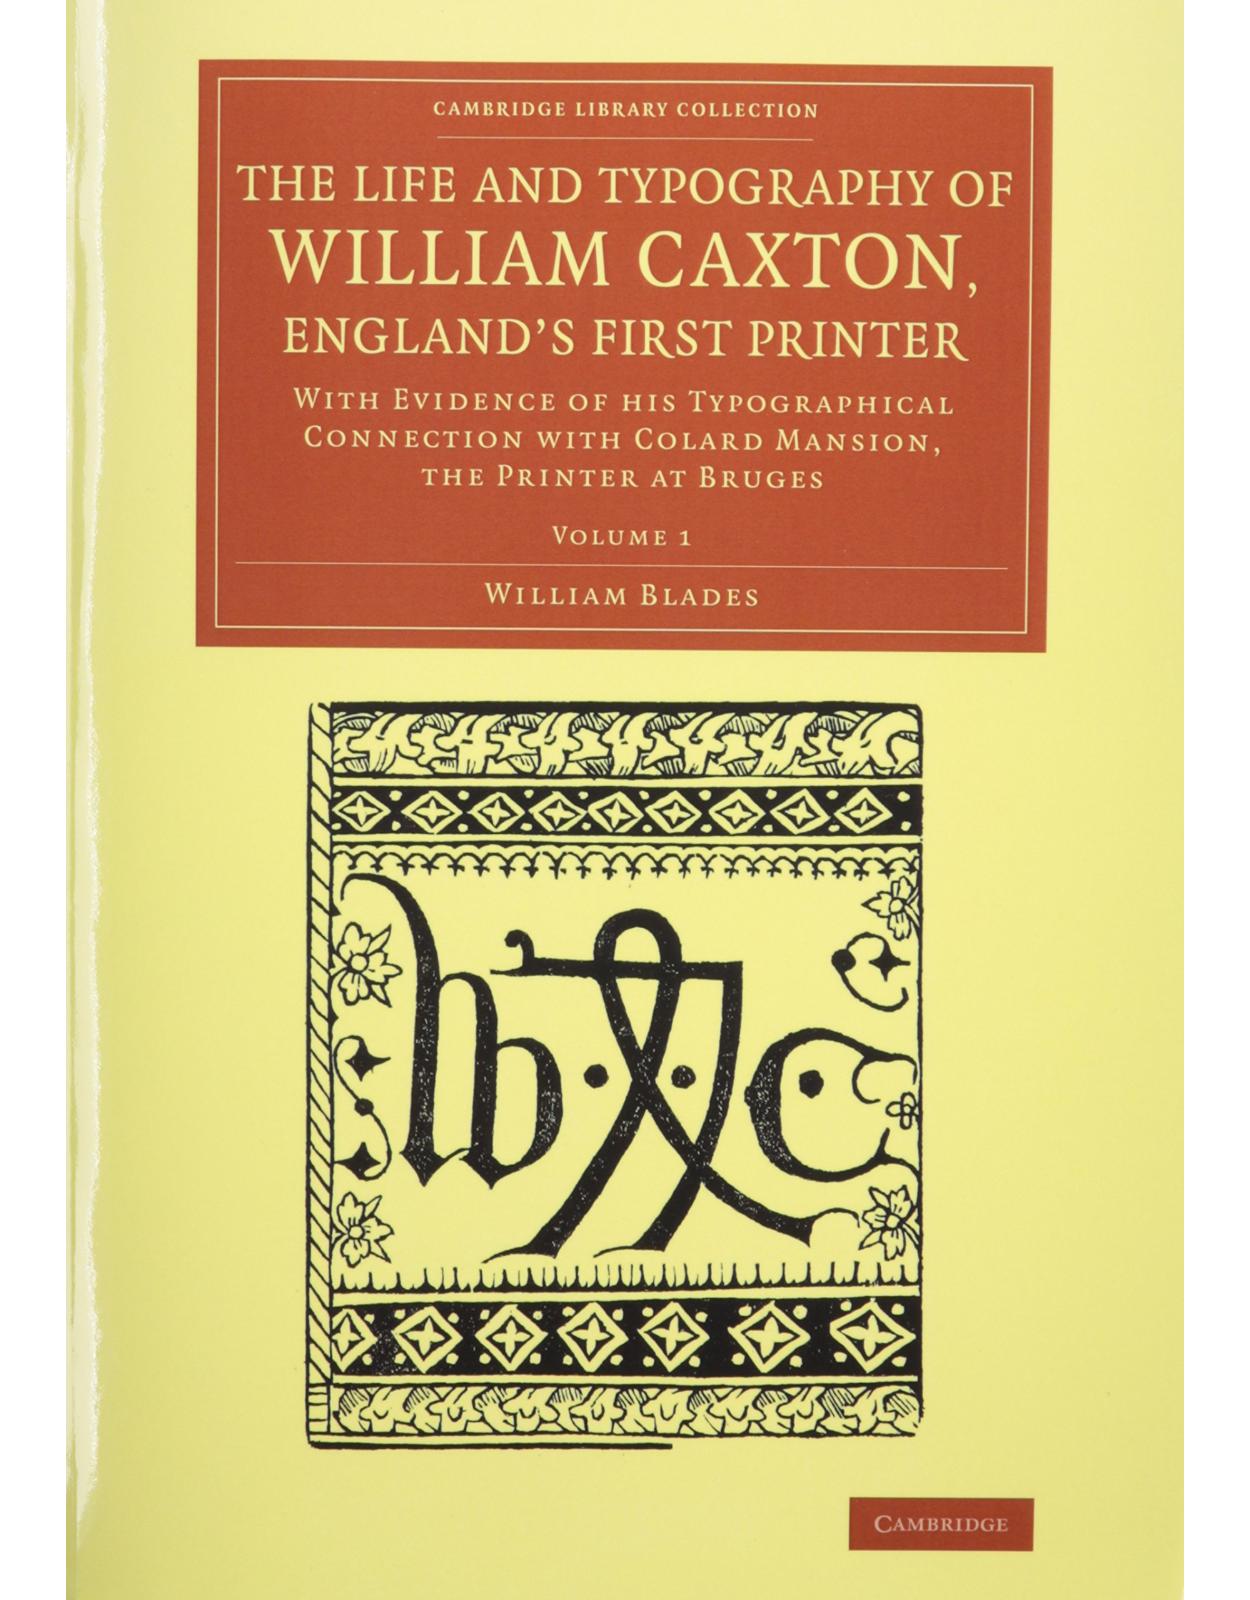 The Life and Typography of William Caxton, England's First Printer 2 Vol,ume Set: With Evidence of his Typographical Connection with Colard Mansion, ... of Printing, Publishing and Libraries)